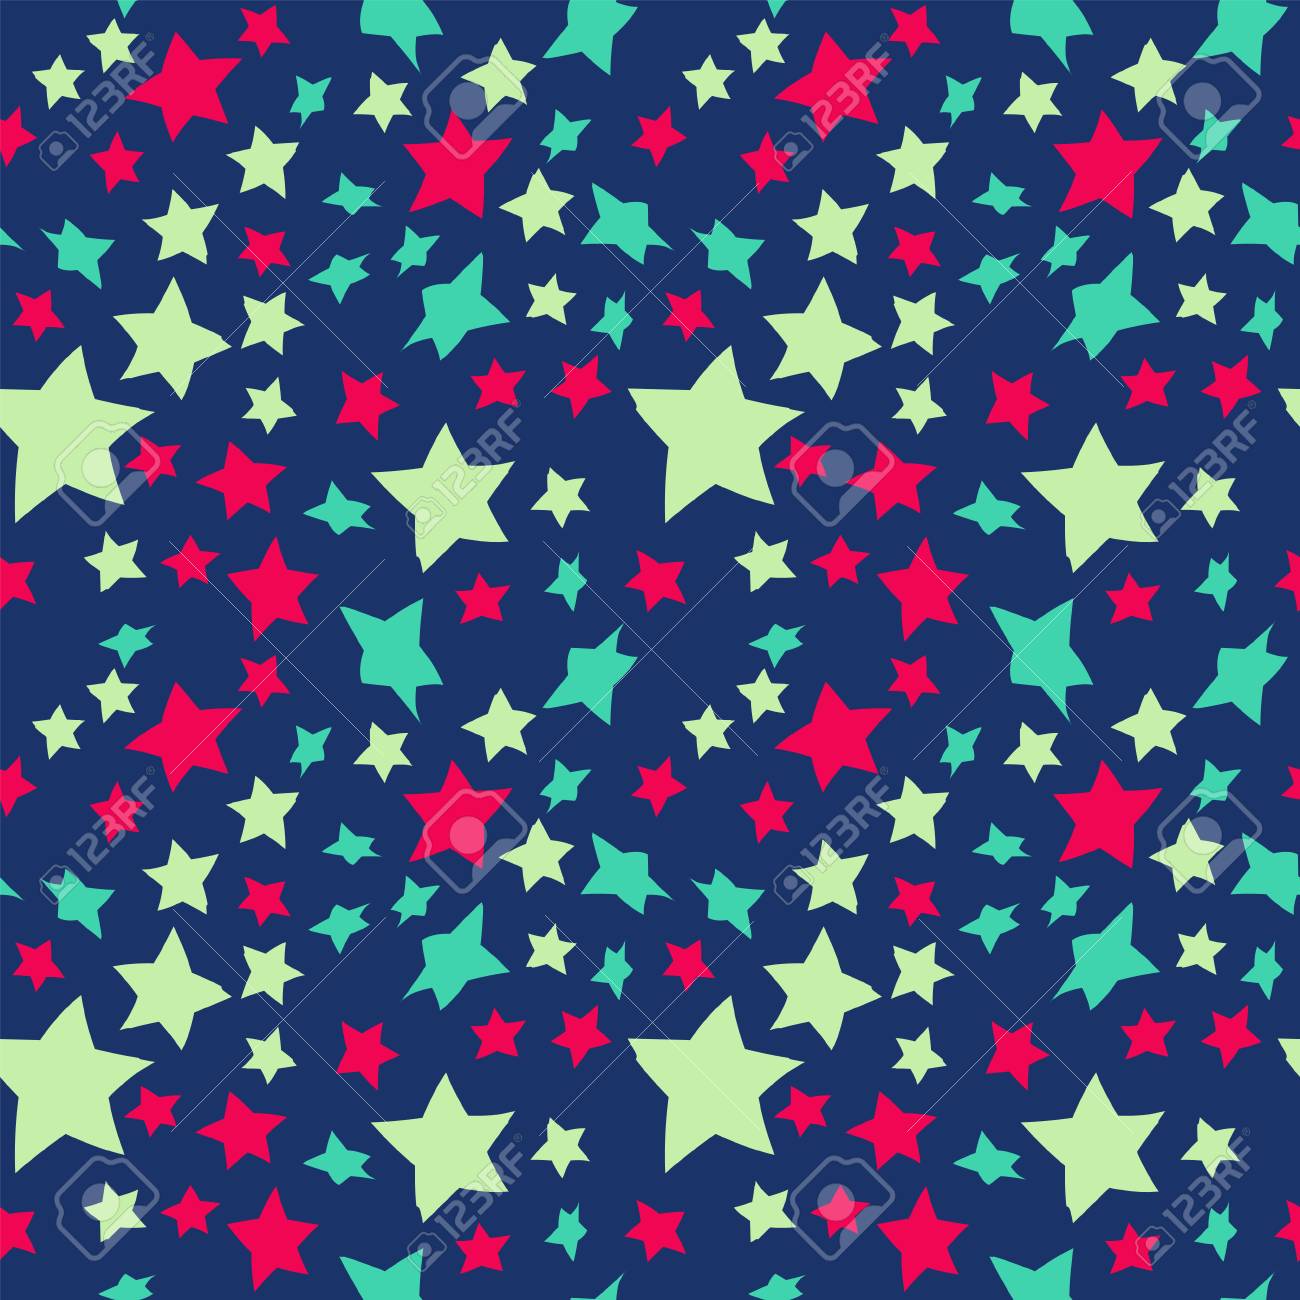 Star Patterned Wallpaper For Scrapbooking Memphis Style Royalty